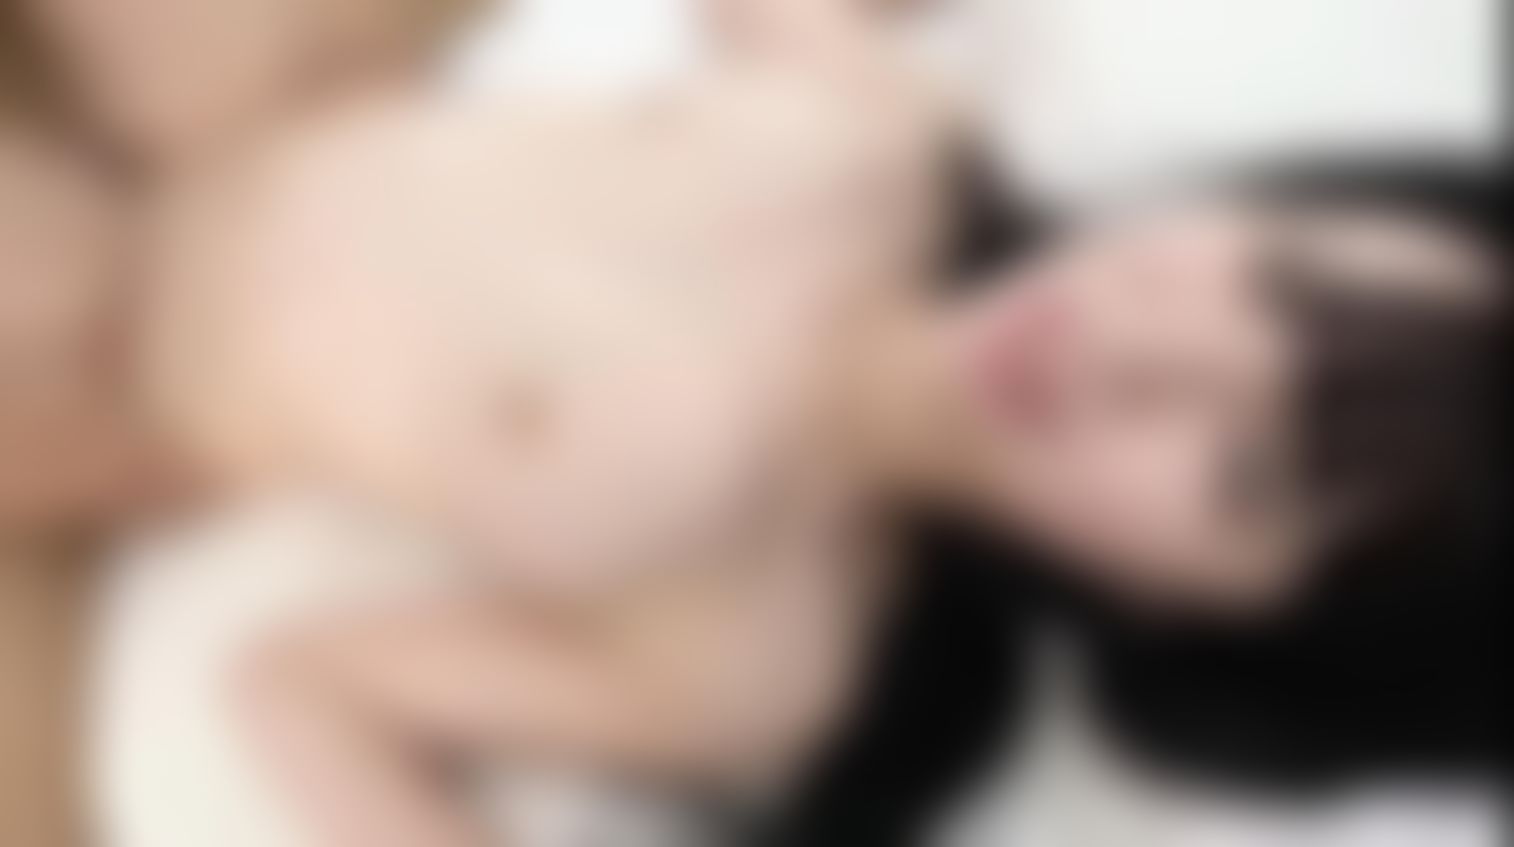 j_teens : Our studio handles numerous jenres of vids such as milf / threesome / musturbation / cosplay / chubbies / bigtits / hentai sex /handjob / blowjob / toys play / doggy / breastfucking / deep throat / cowgirl / spider / POV / cosplay / sailor suits / school girls / gouse wives / maid... \n\n #japanese #日本人 #amateur #素人 #hentai #変態 #uncensored #無修正 #orgy #乱交 #多P #threesome #3P #blowjob #フェラ #口交